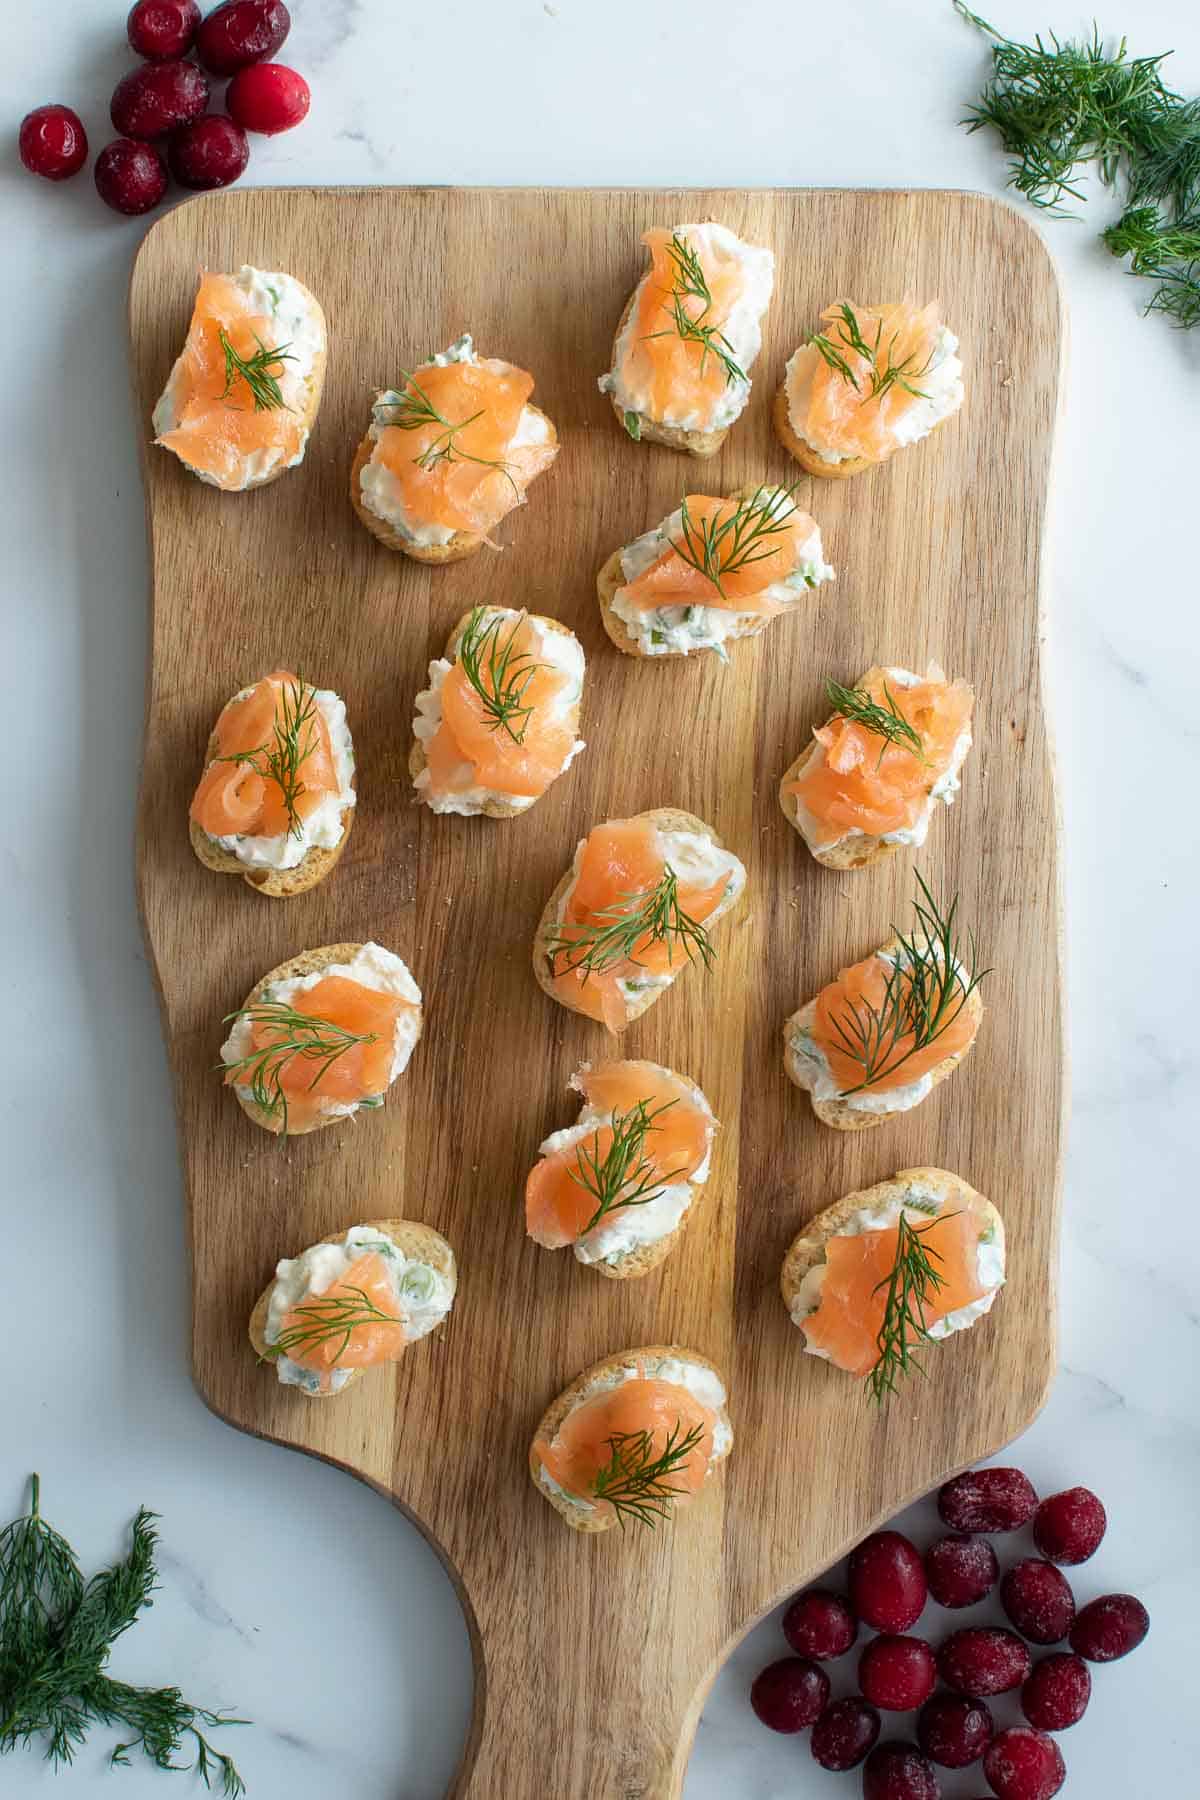 Canapes with cream cheese, dill and smoked salmon on a cutting board with cranberries on the side.